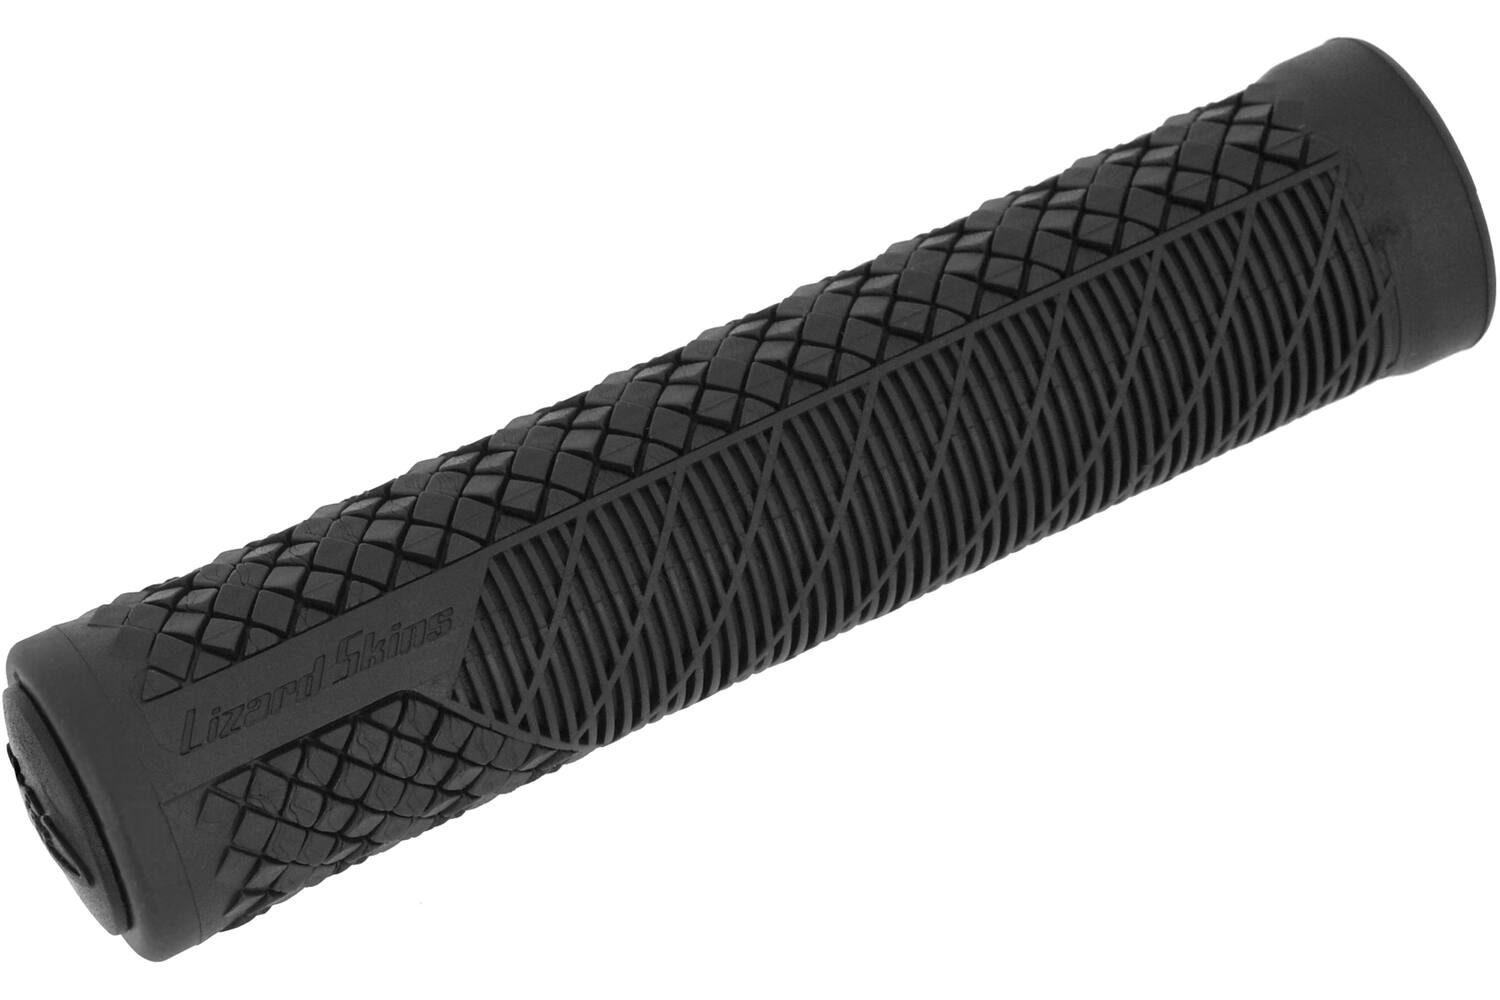 Grips charger evo - black